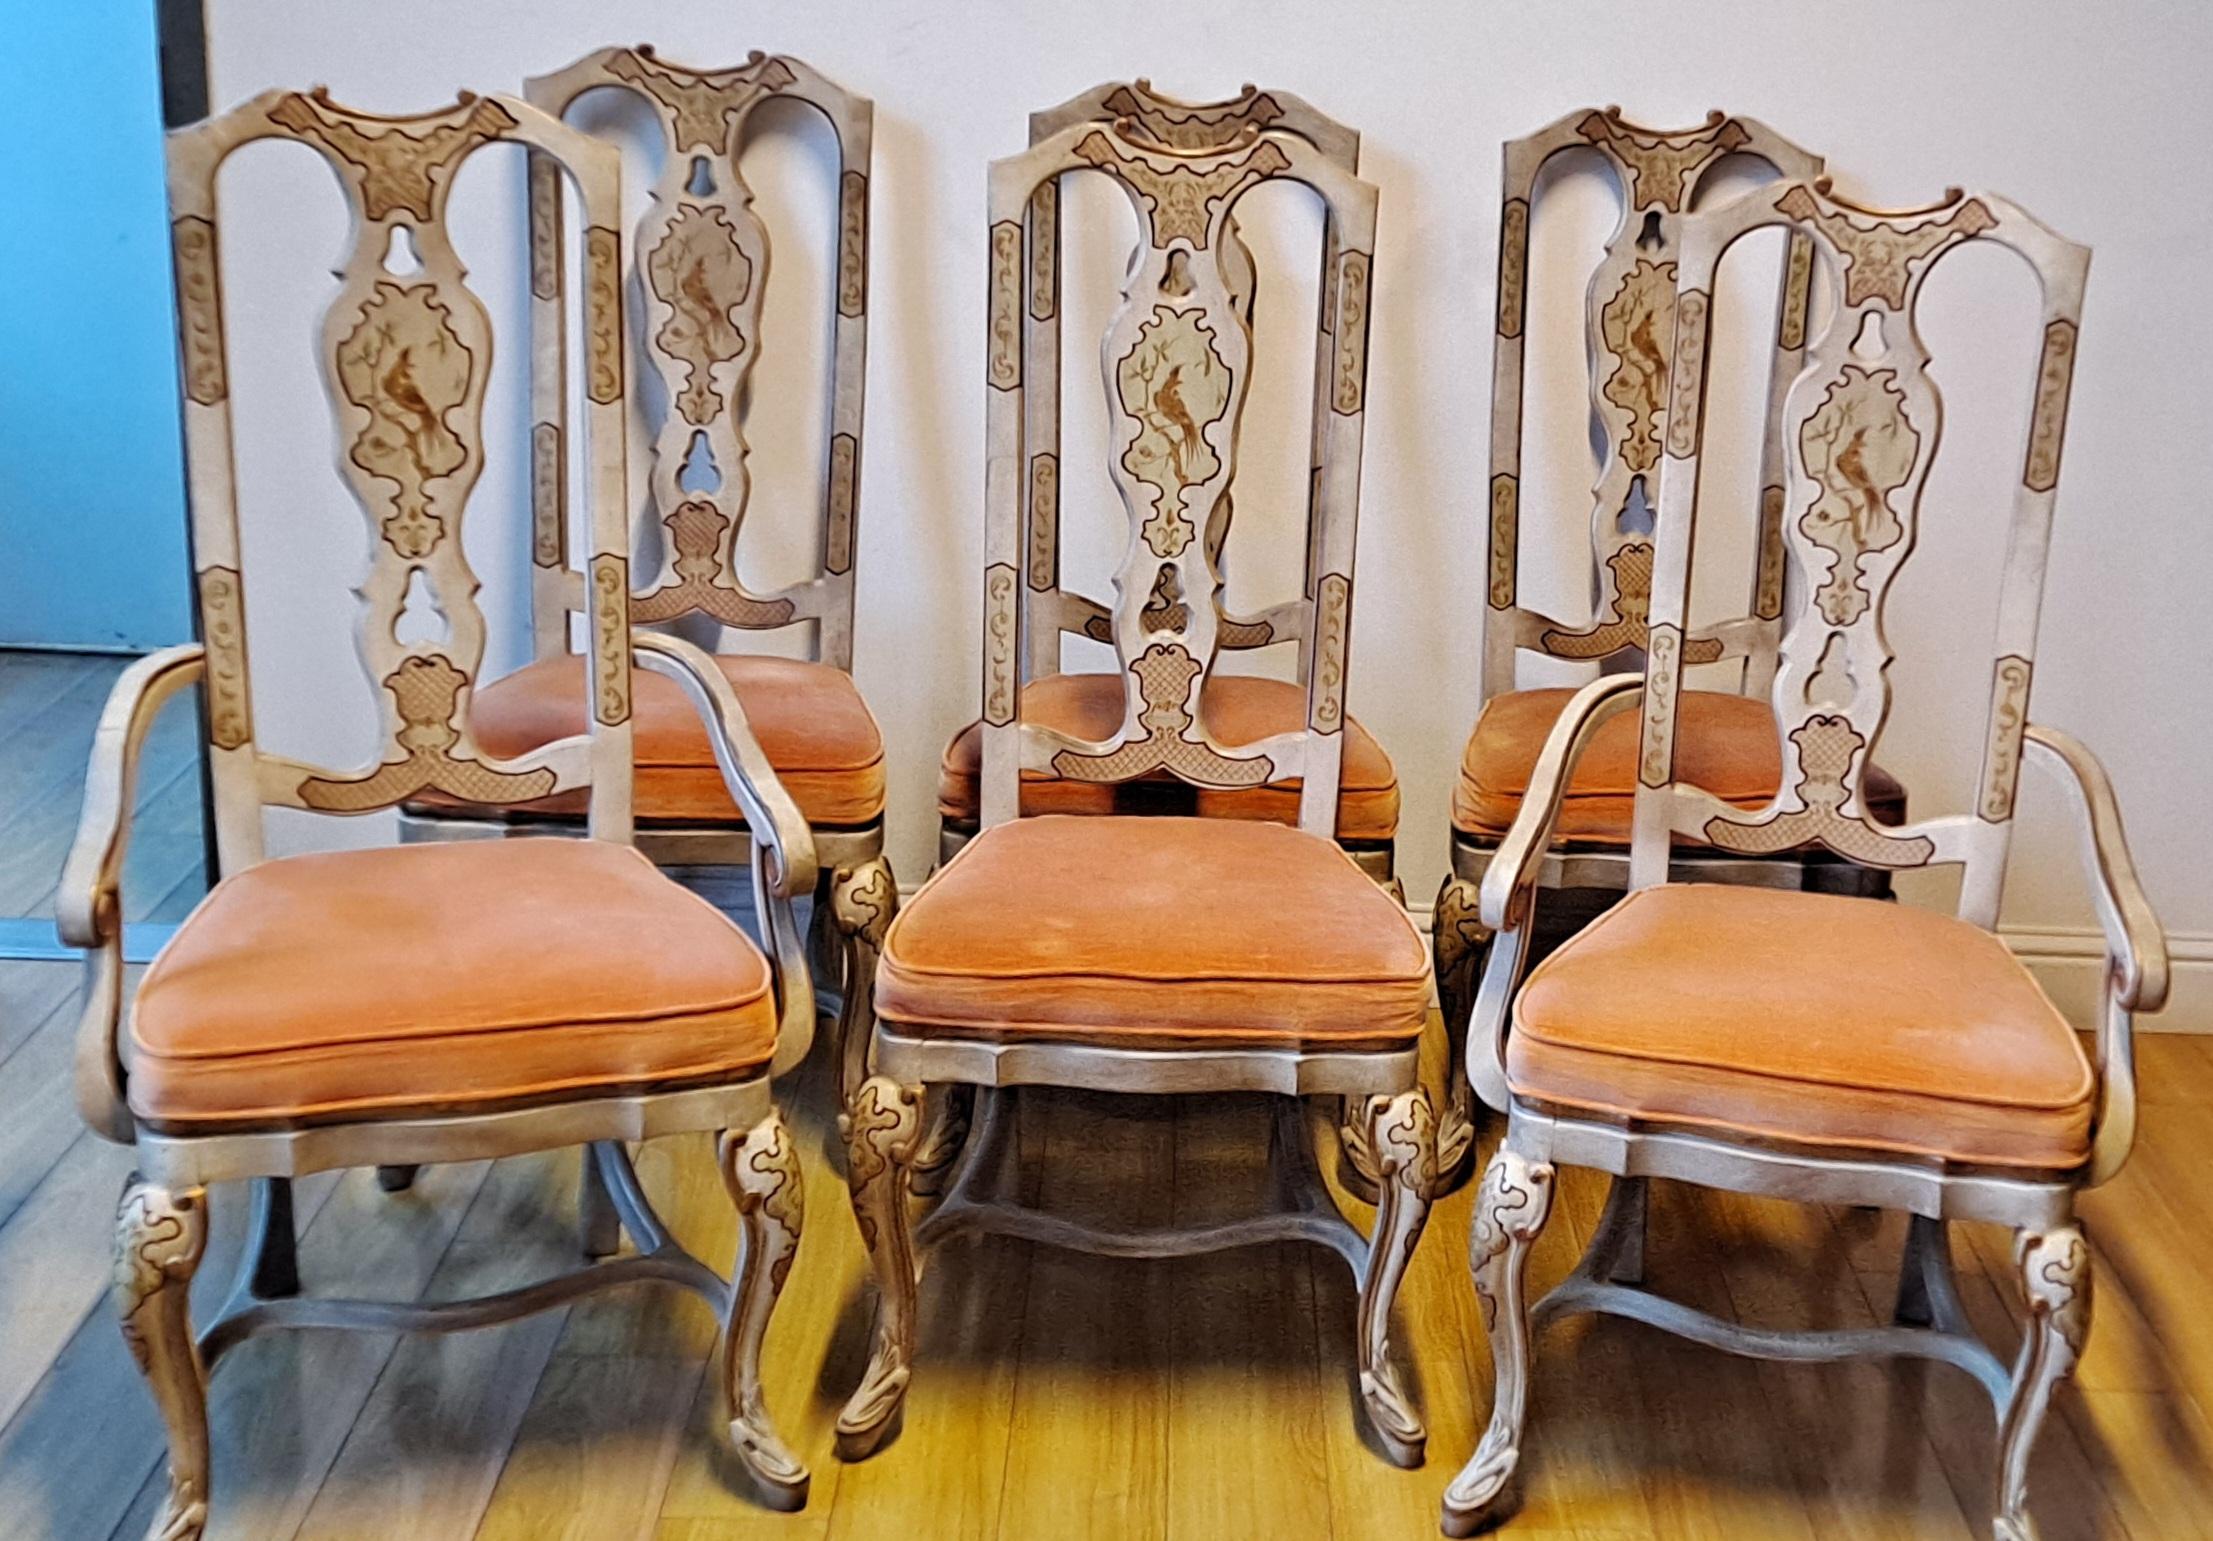 Set of Six Dining Chairs by Drexel Heritage Collection

Cream painted with Asian motif

Stretcher base frames

Two arm and four side chairs

Orange upholstered seats

Armchairs 23 x 23 x 44

Side chairs 20.5 x 21.5 x 44

Seat height 19